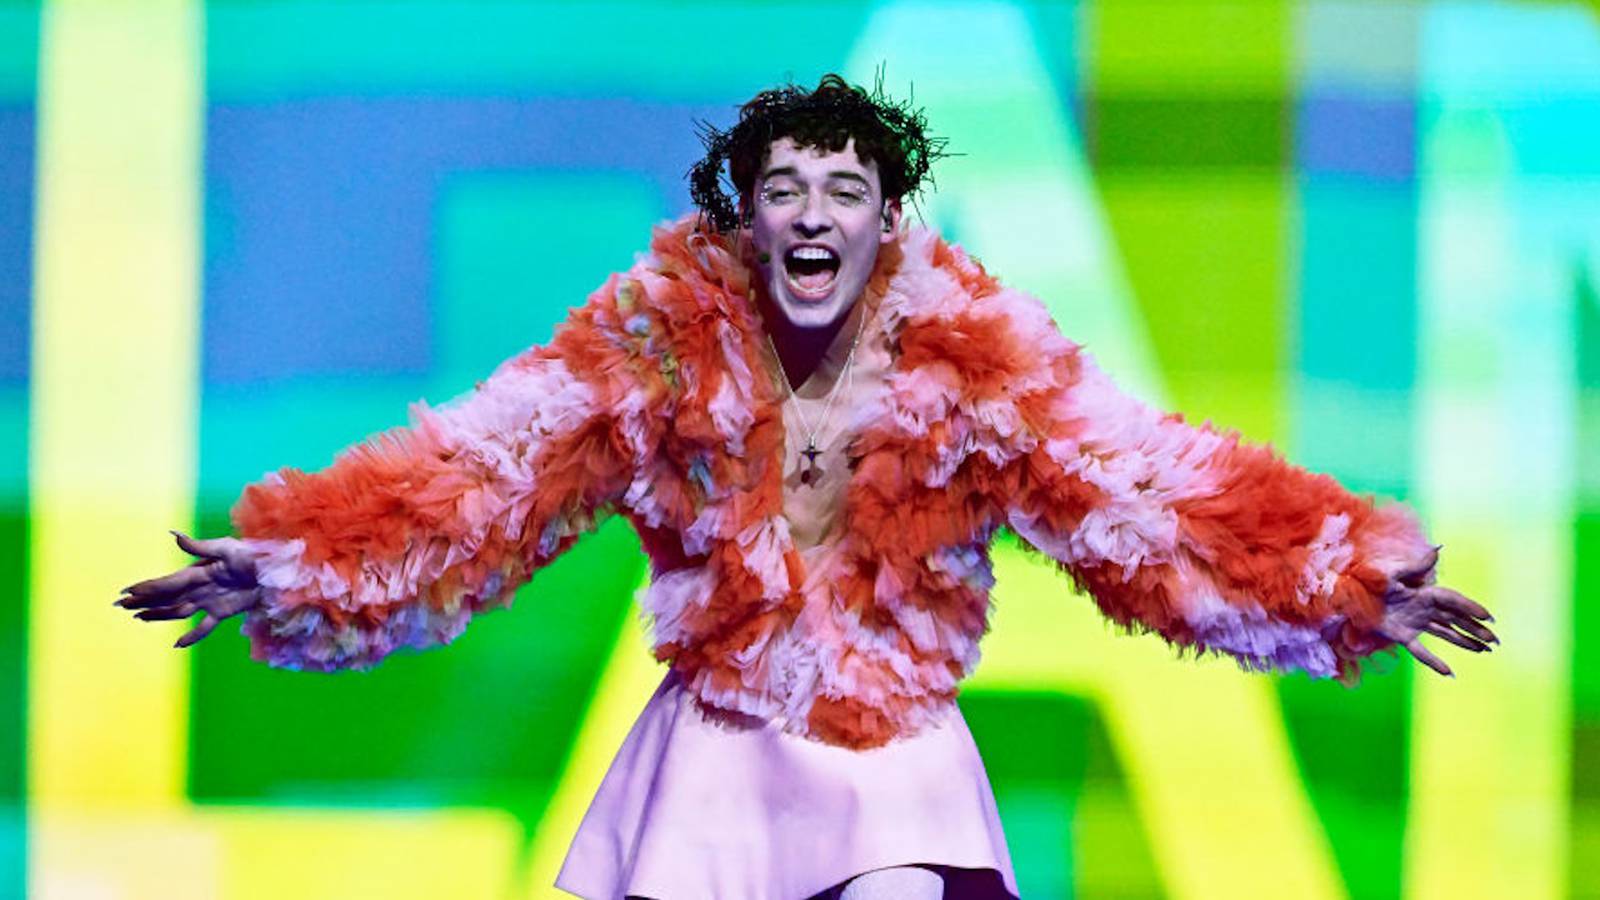 Nemo gives Switzerland victory in 68th Eurovision Song Contest Hits